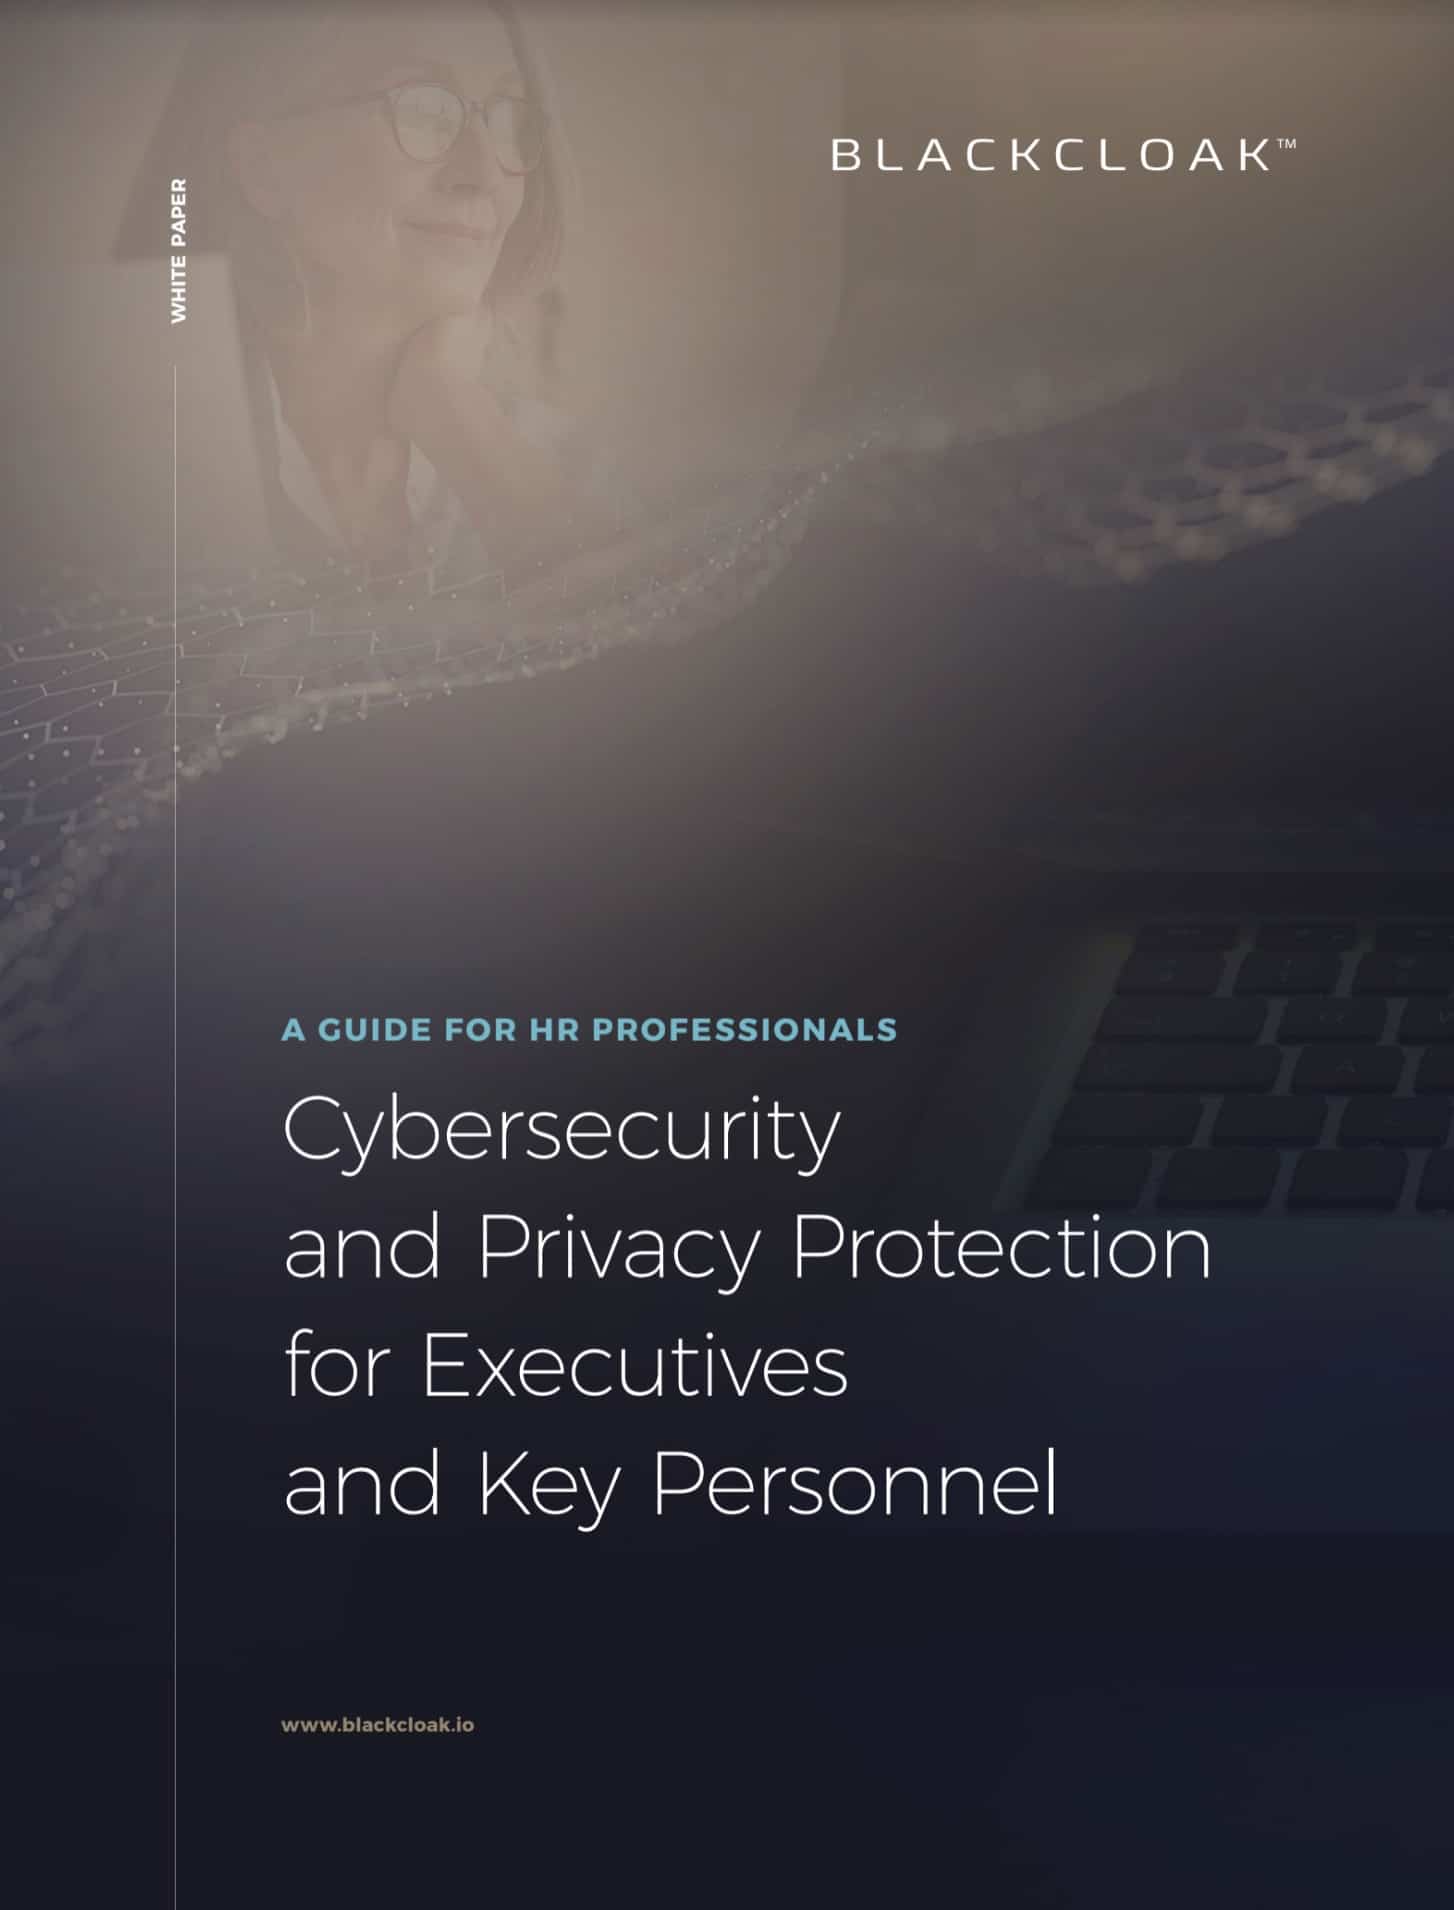 Cybersecurity and privacy protection for executives and key personnel